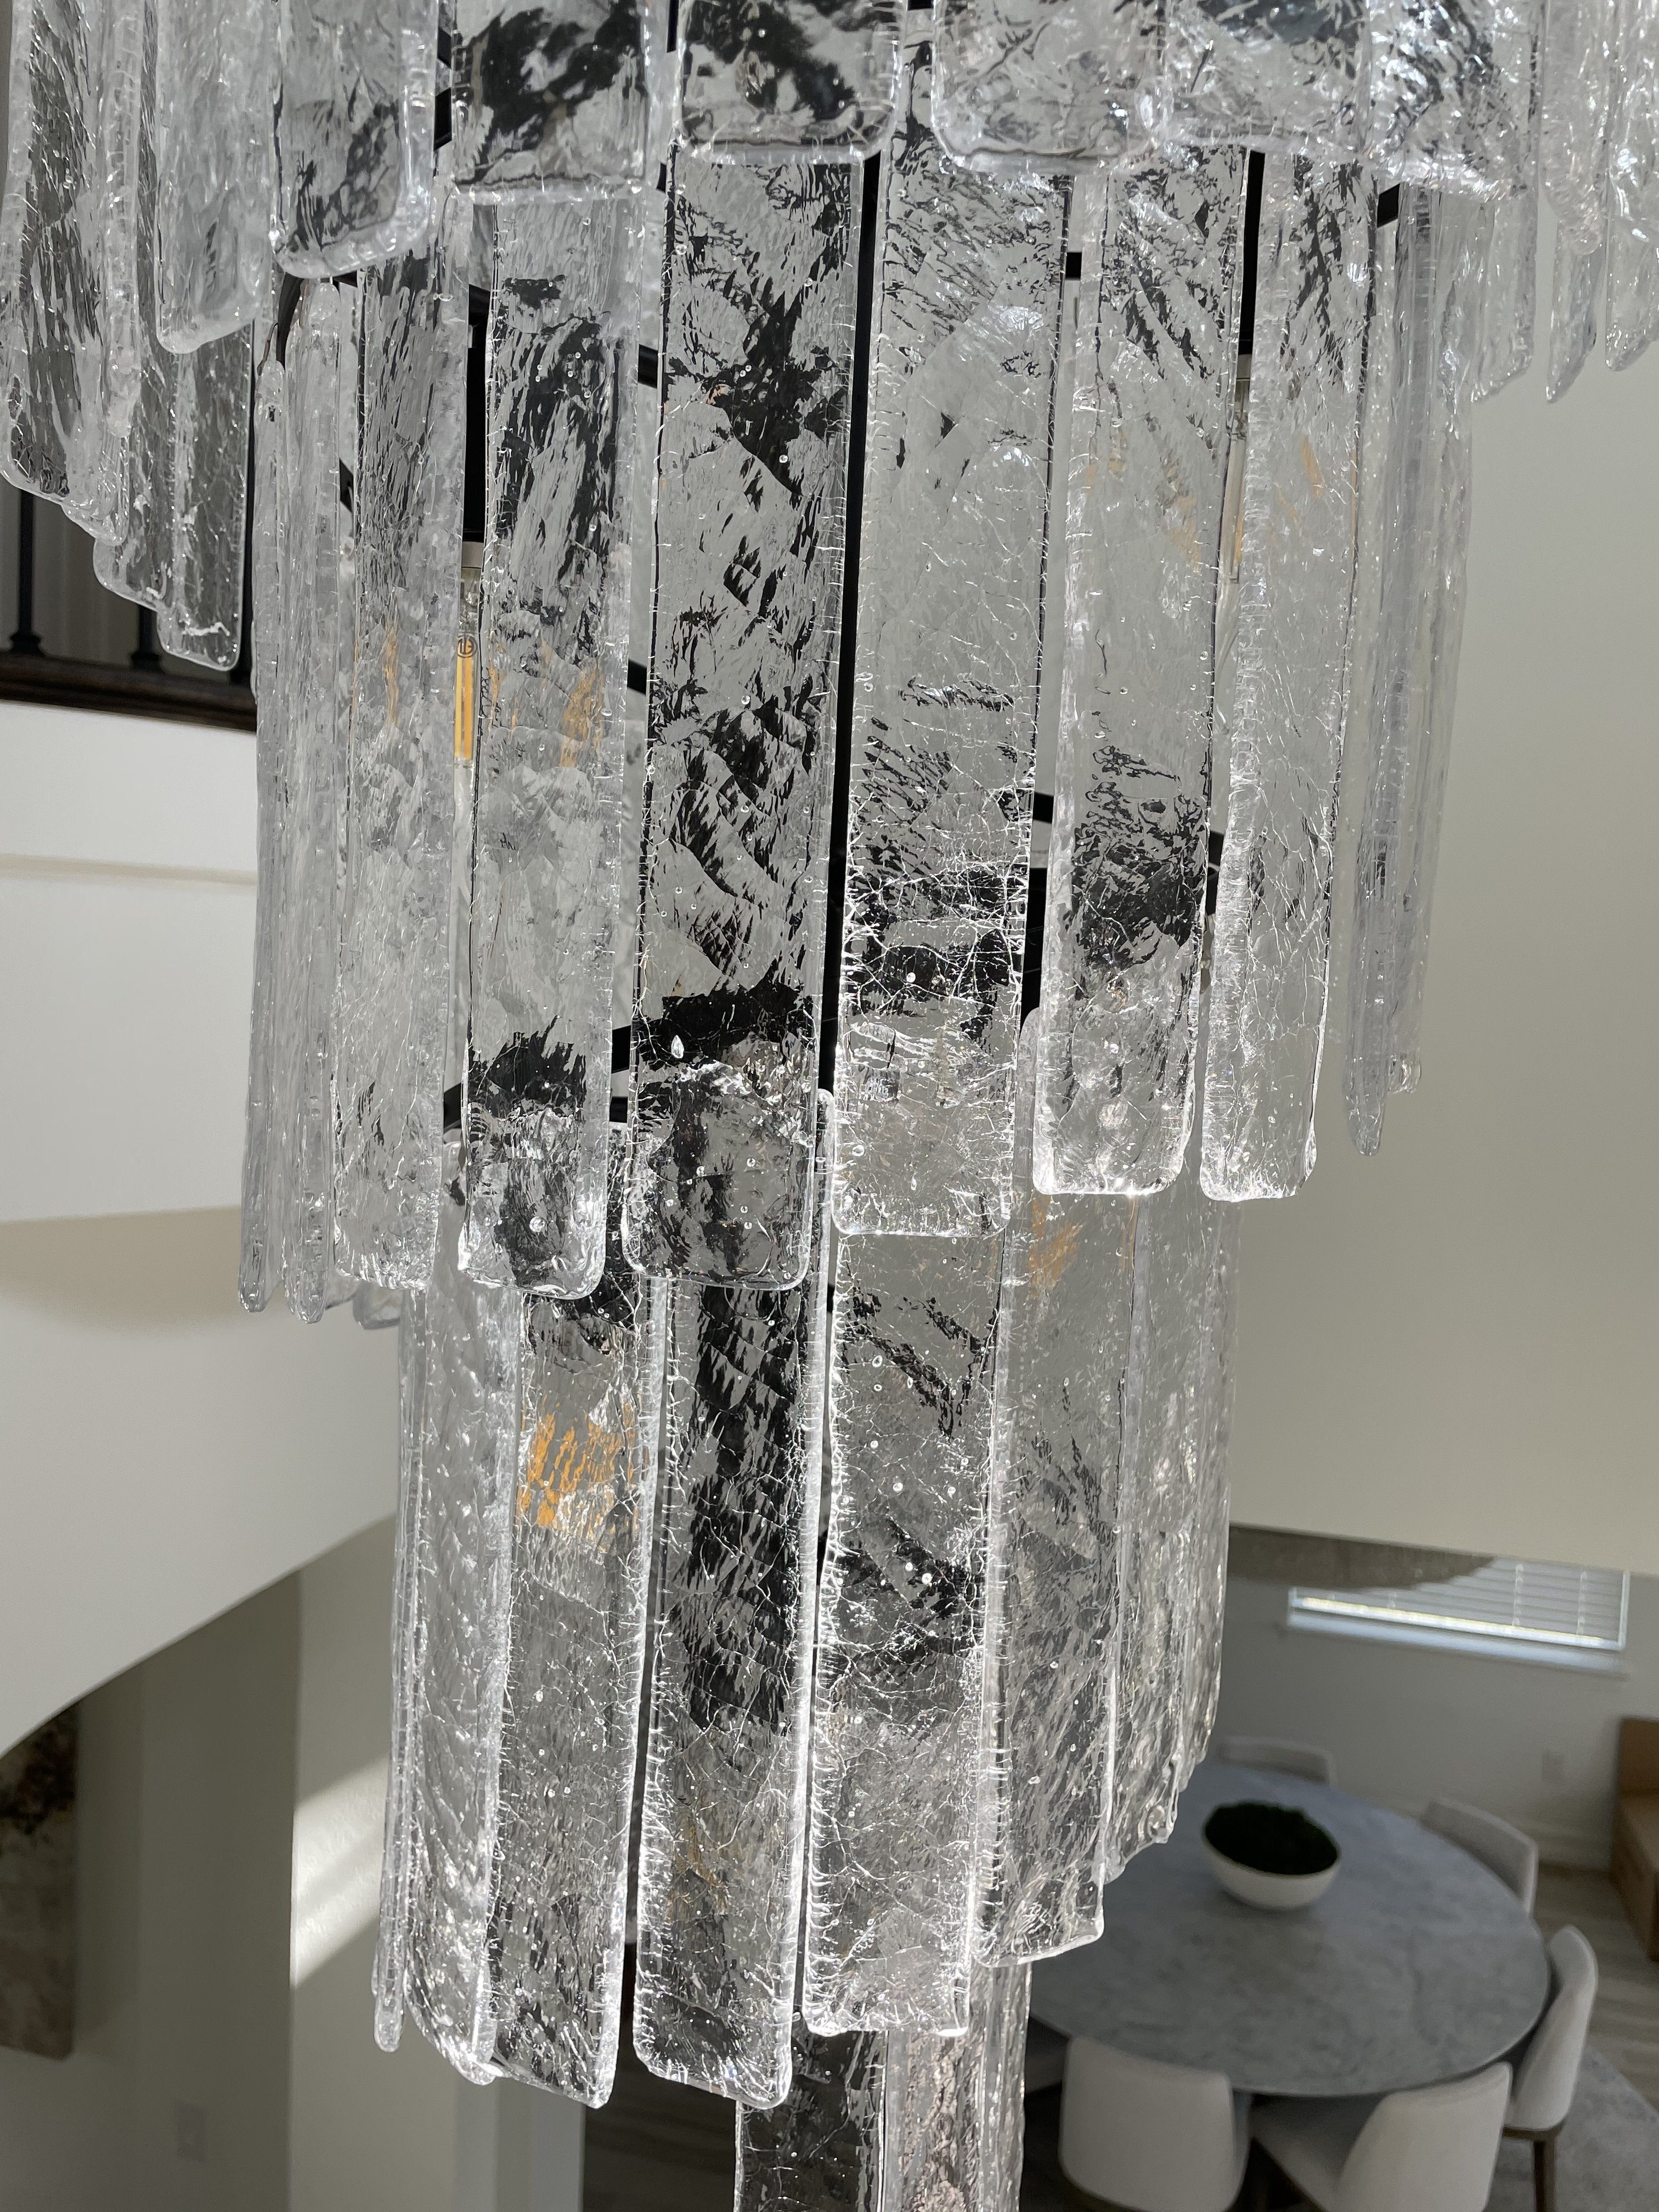 Seline Spiral Tiered/ Layered Cracked Textured Glass Chandelier - Italian Concept - 